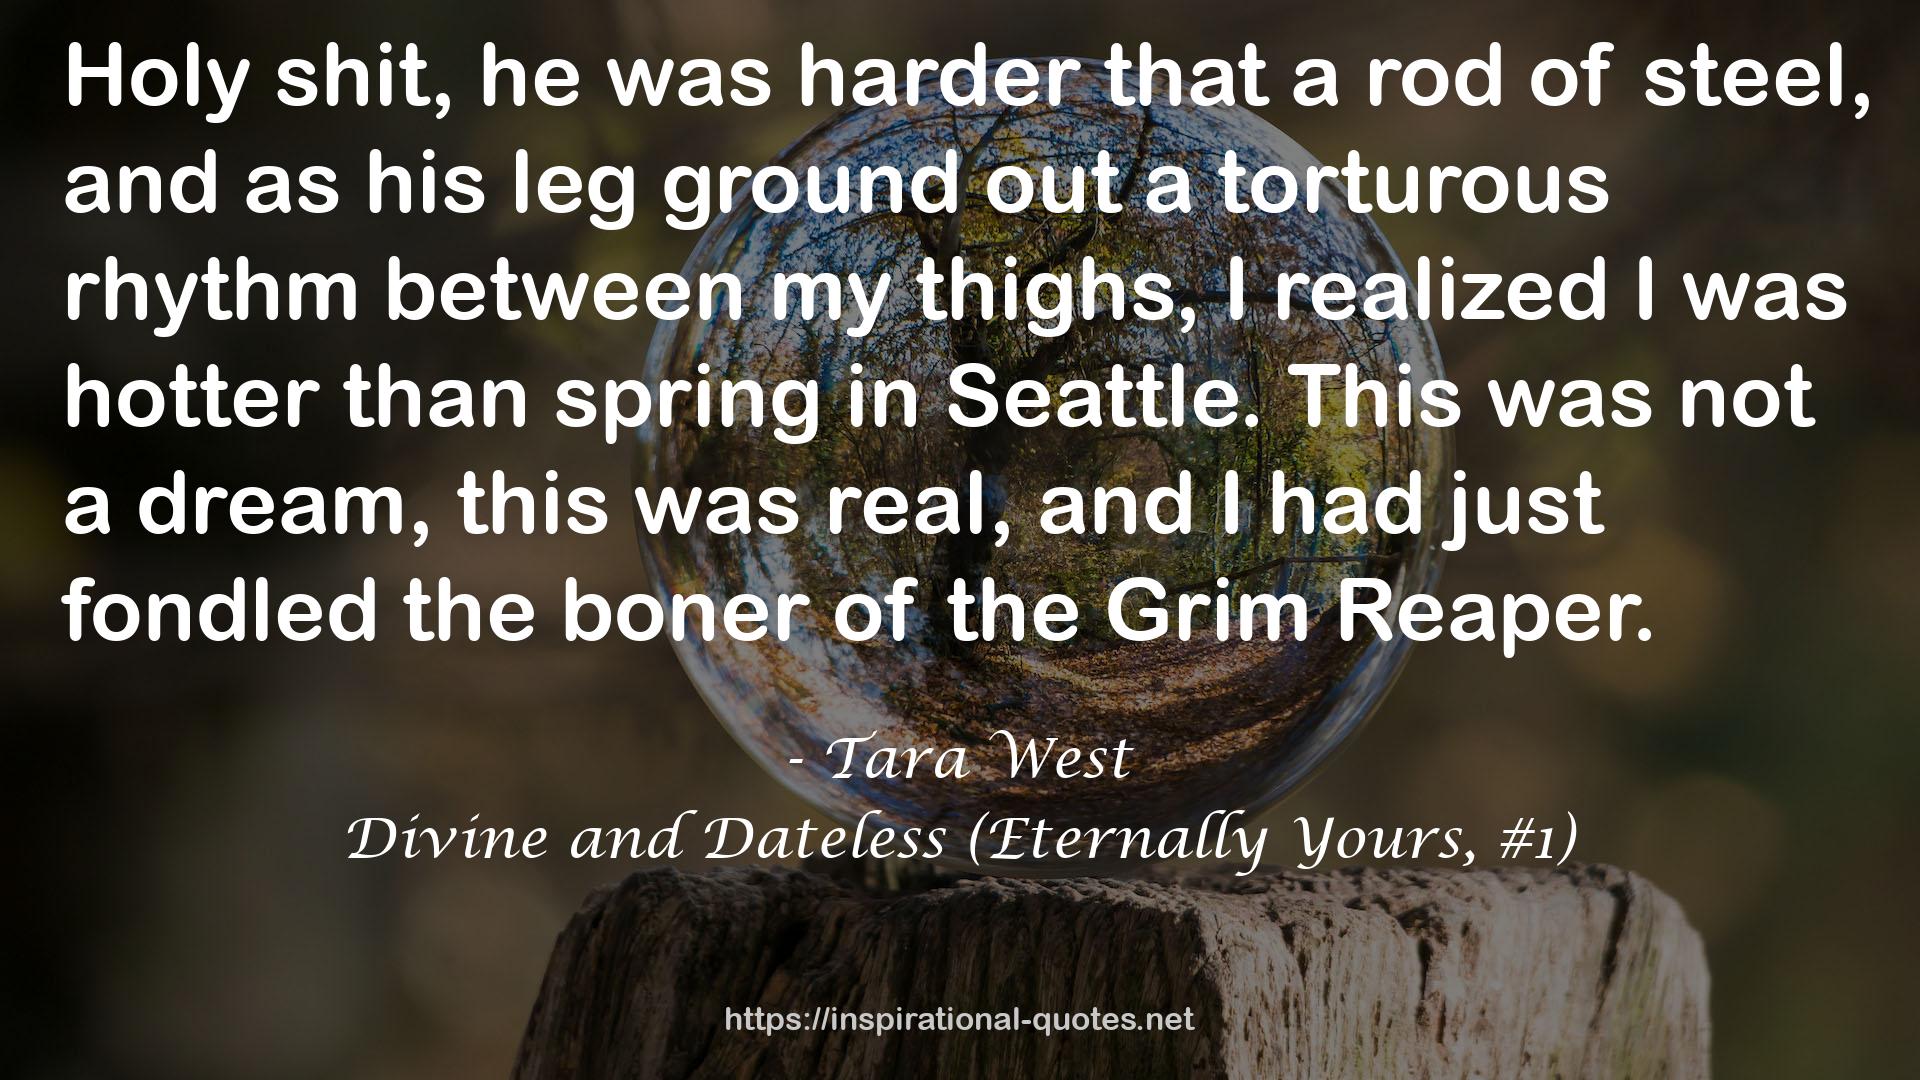 Divine and Dateless (Eternally Yours, #1) QUOTES